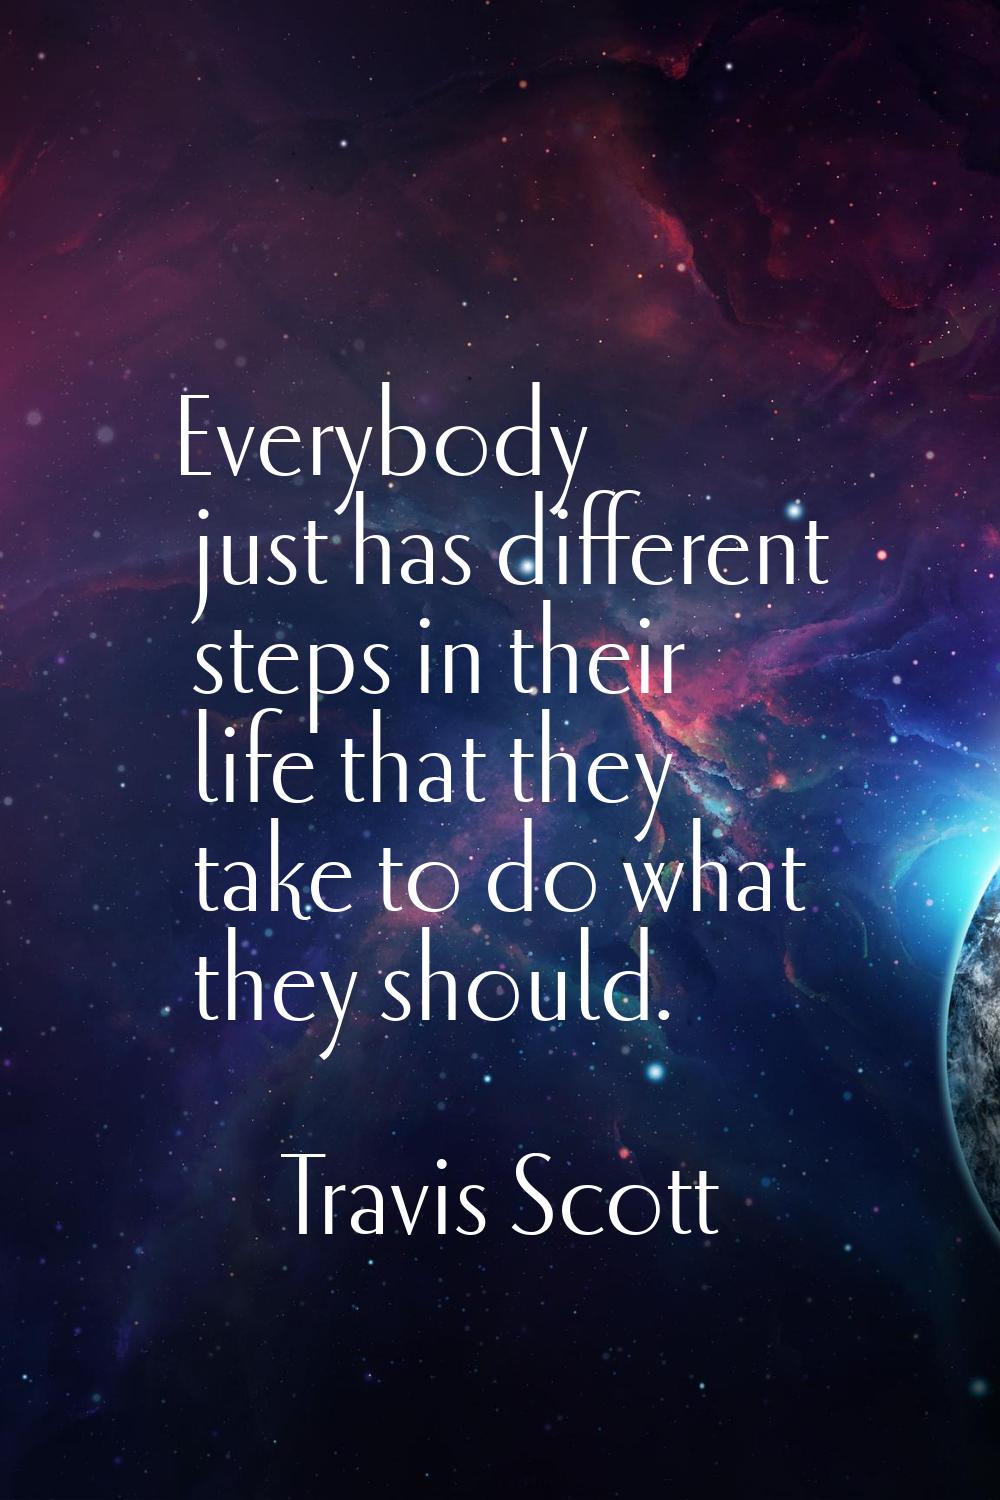 Everybody just has different steps in their life that they take to do what they should.